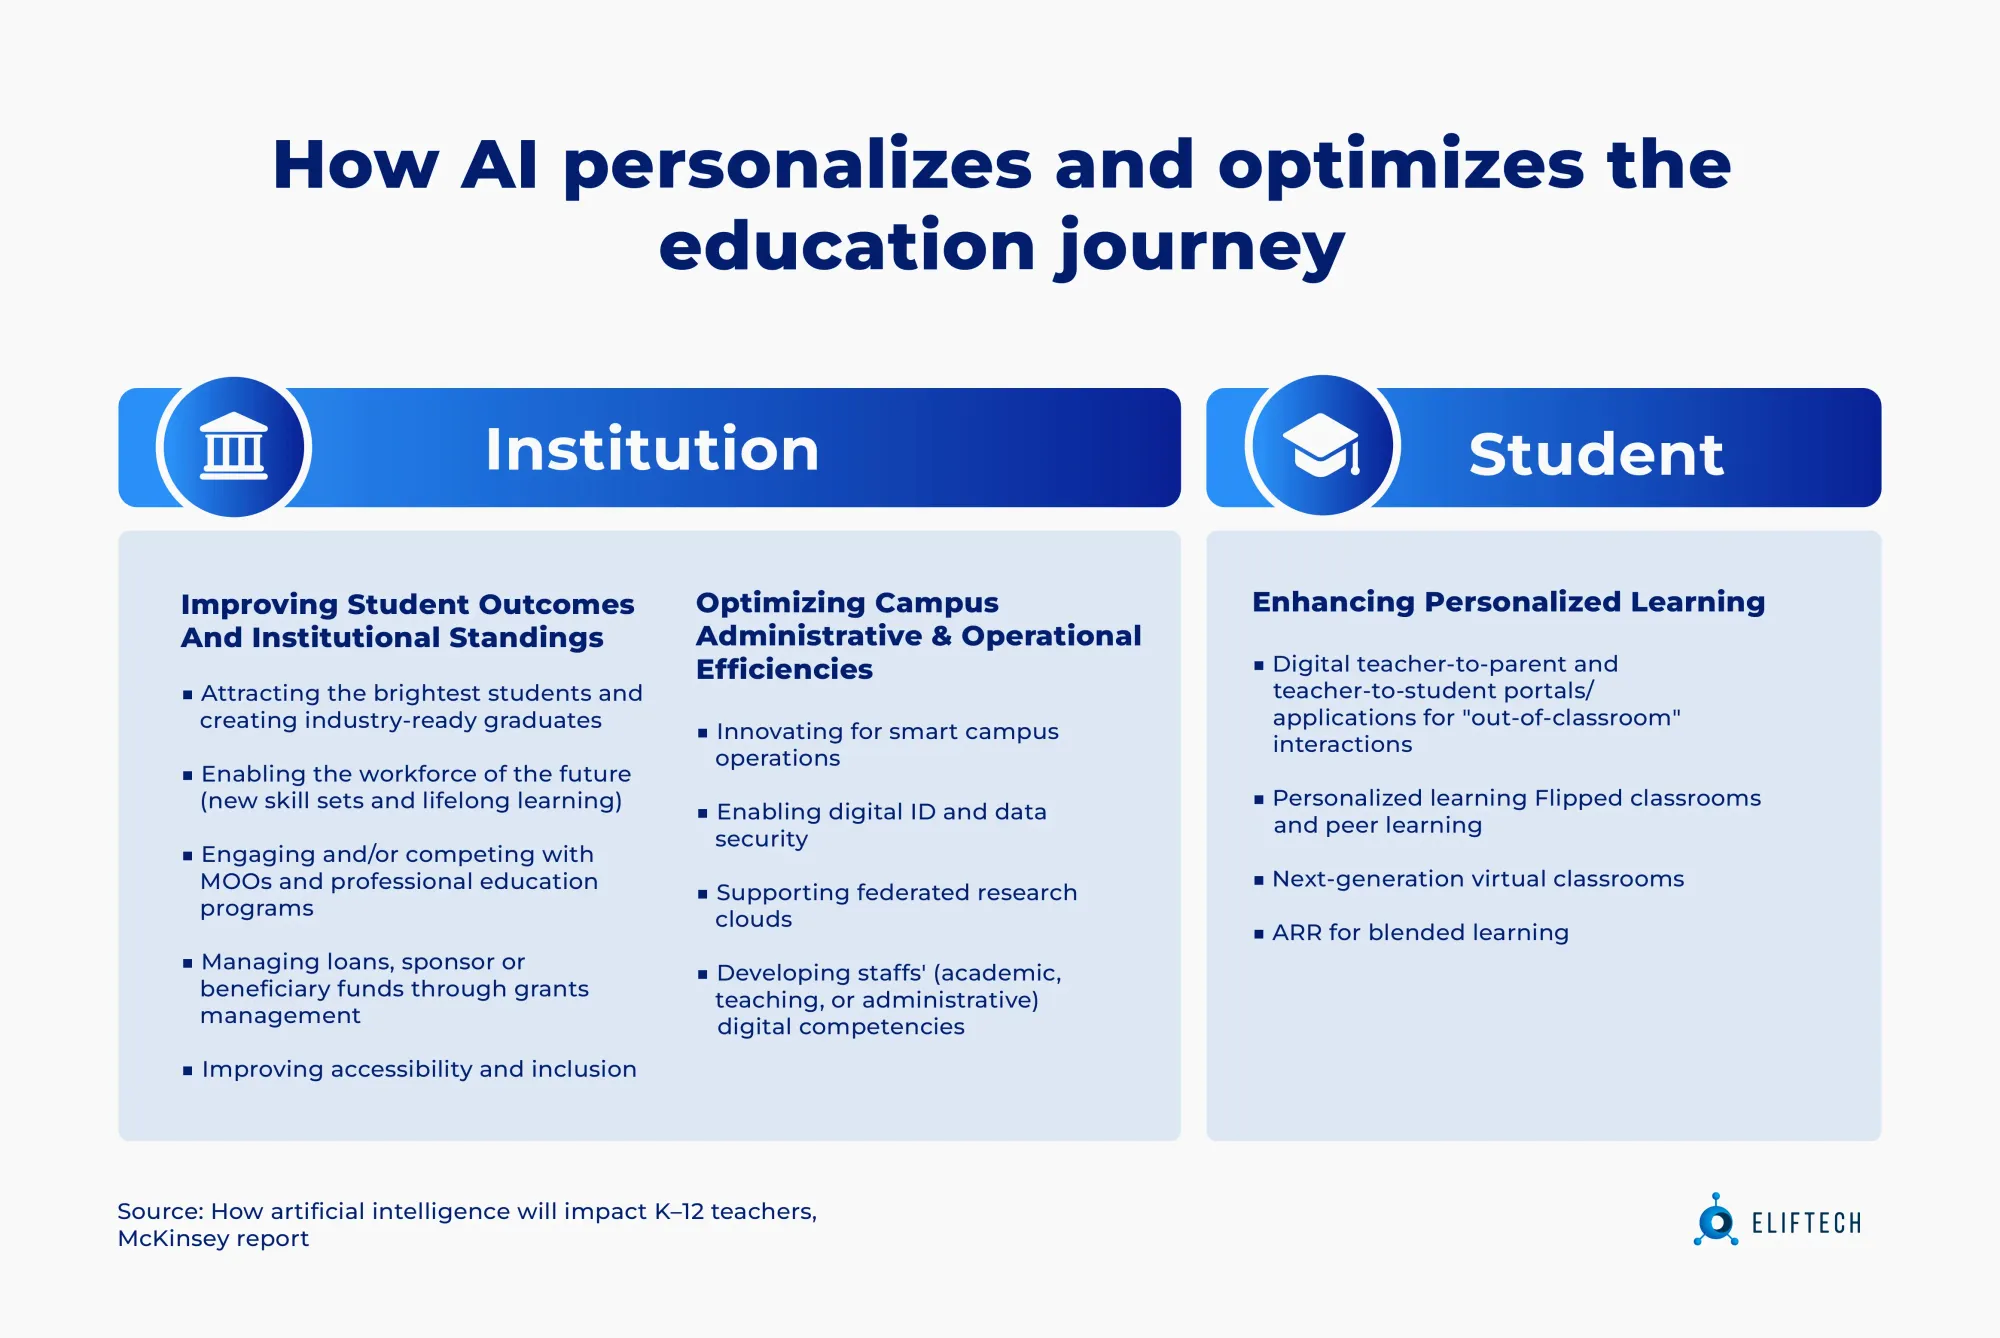 Benefits of AI for institutions and students